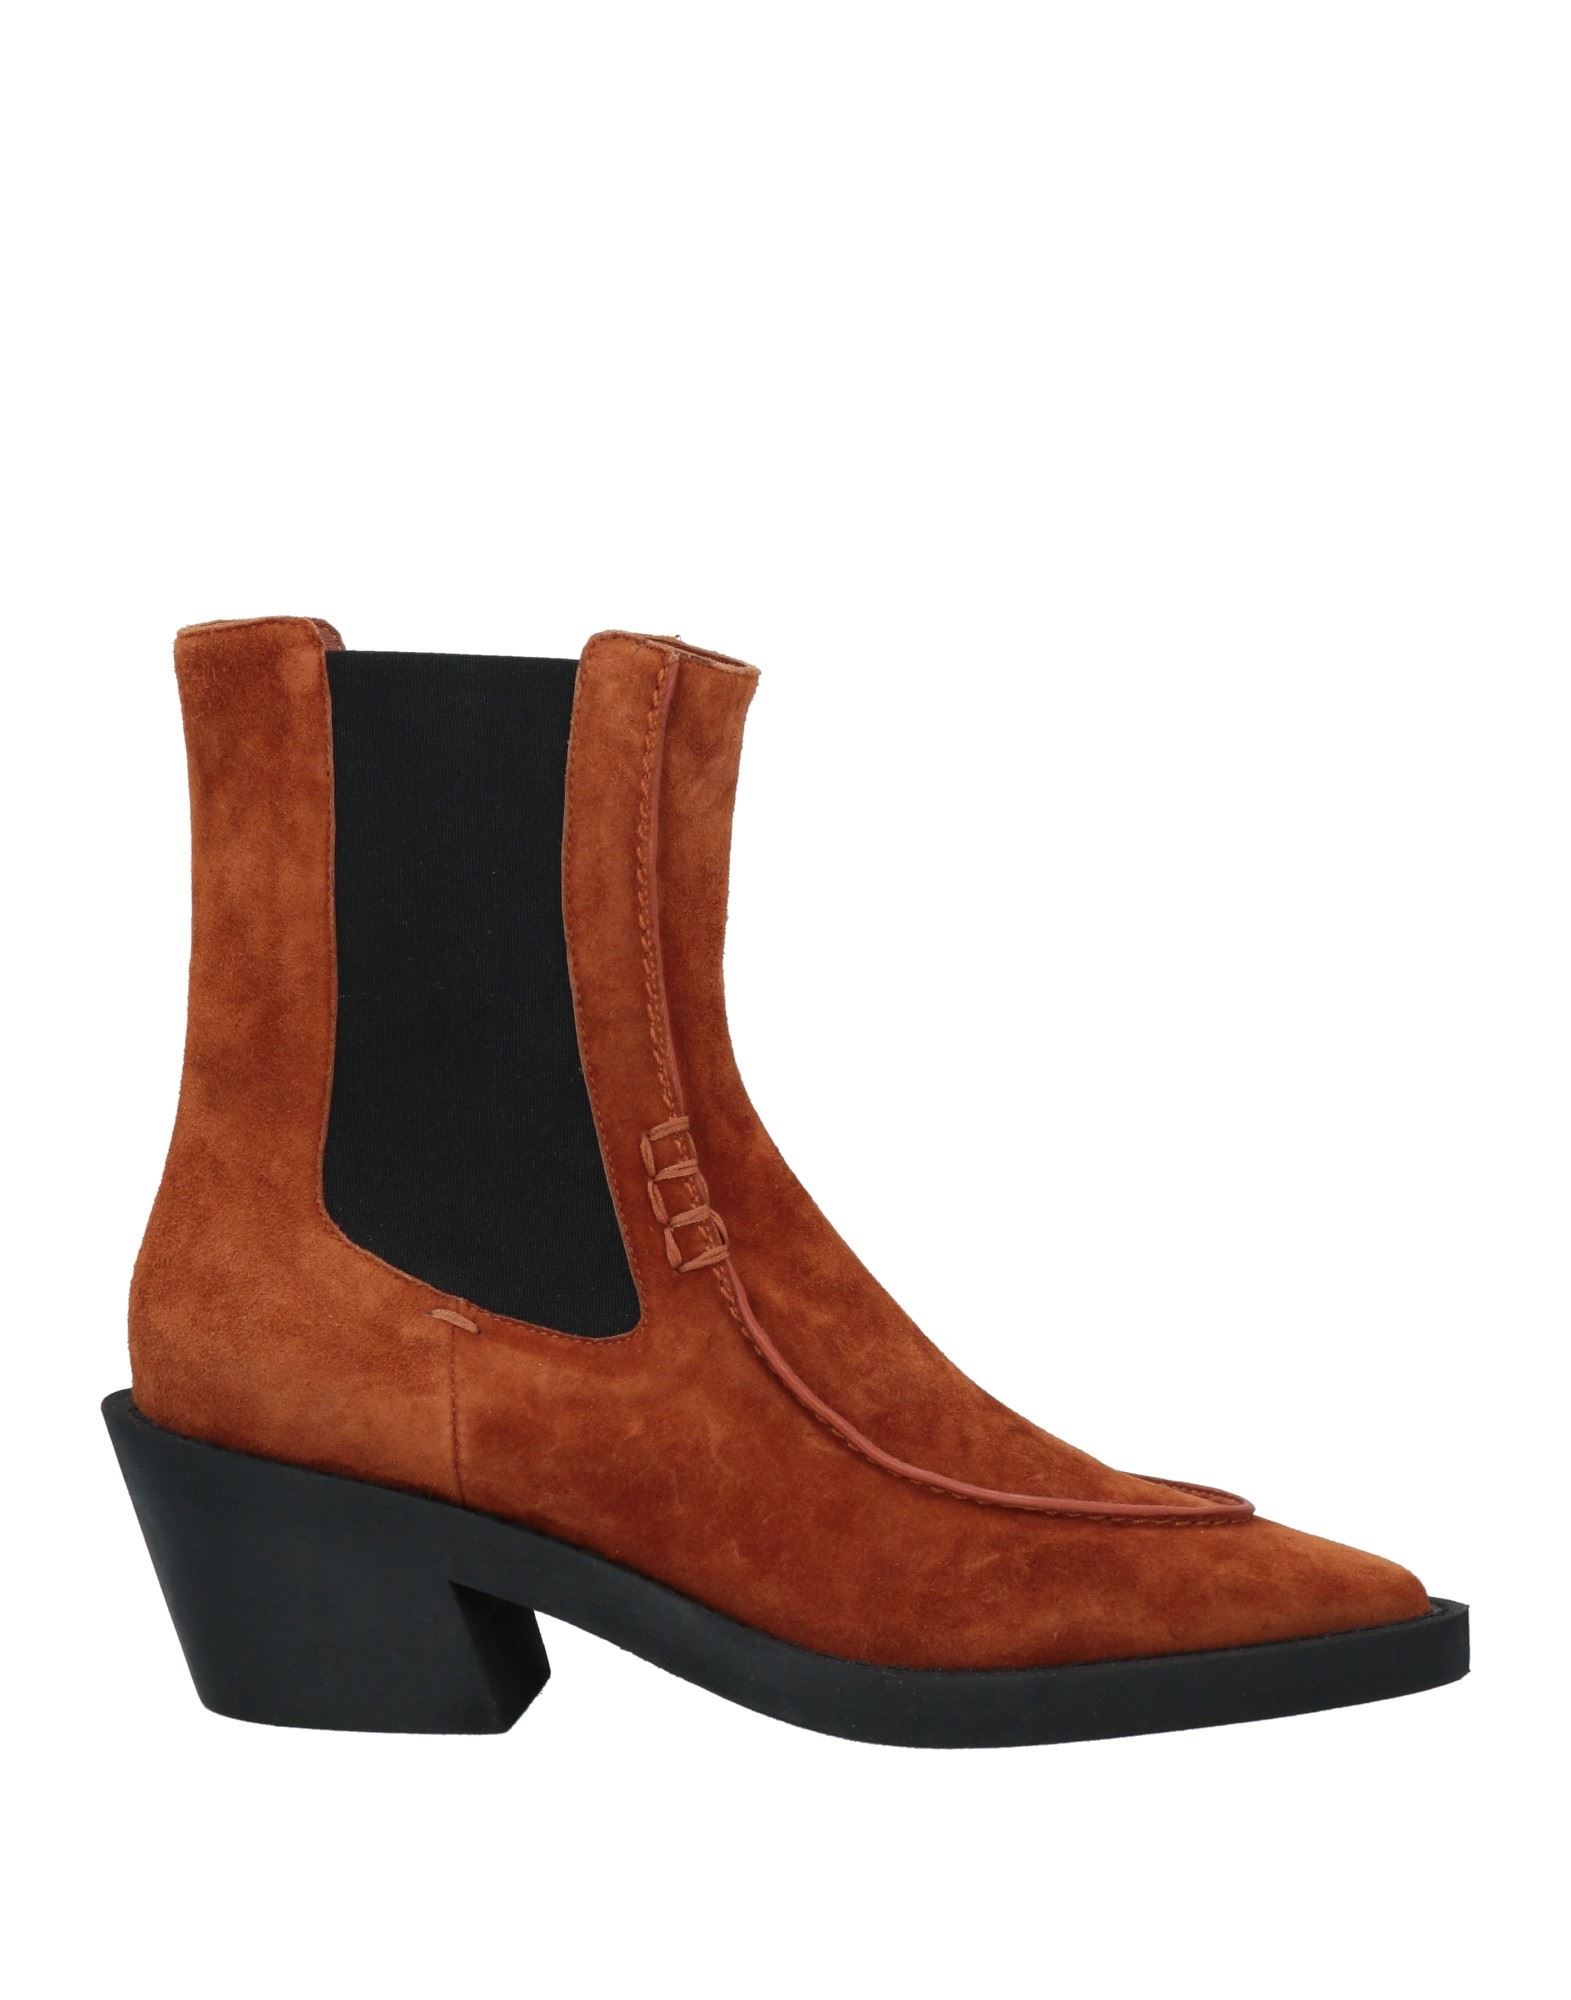 Khaite Ankle Boots In Tan